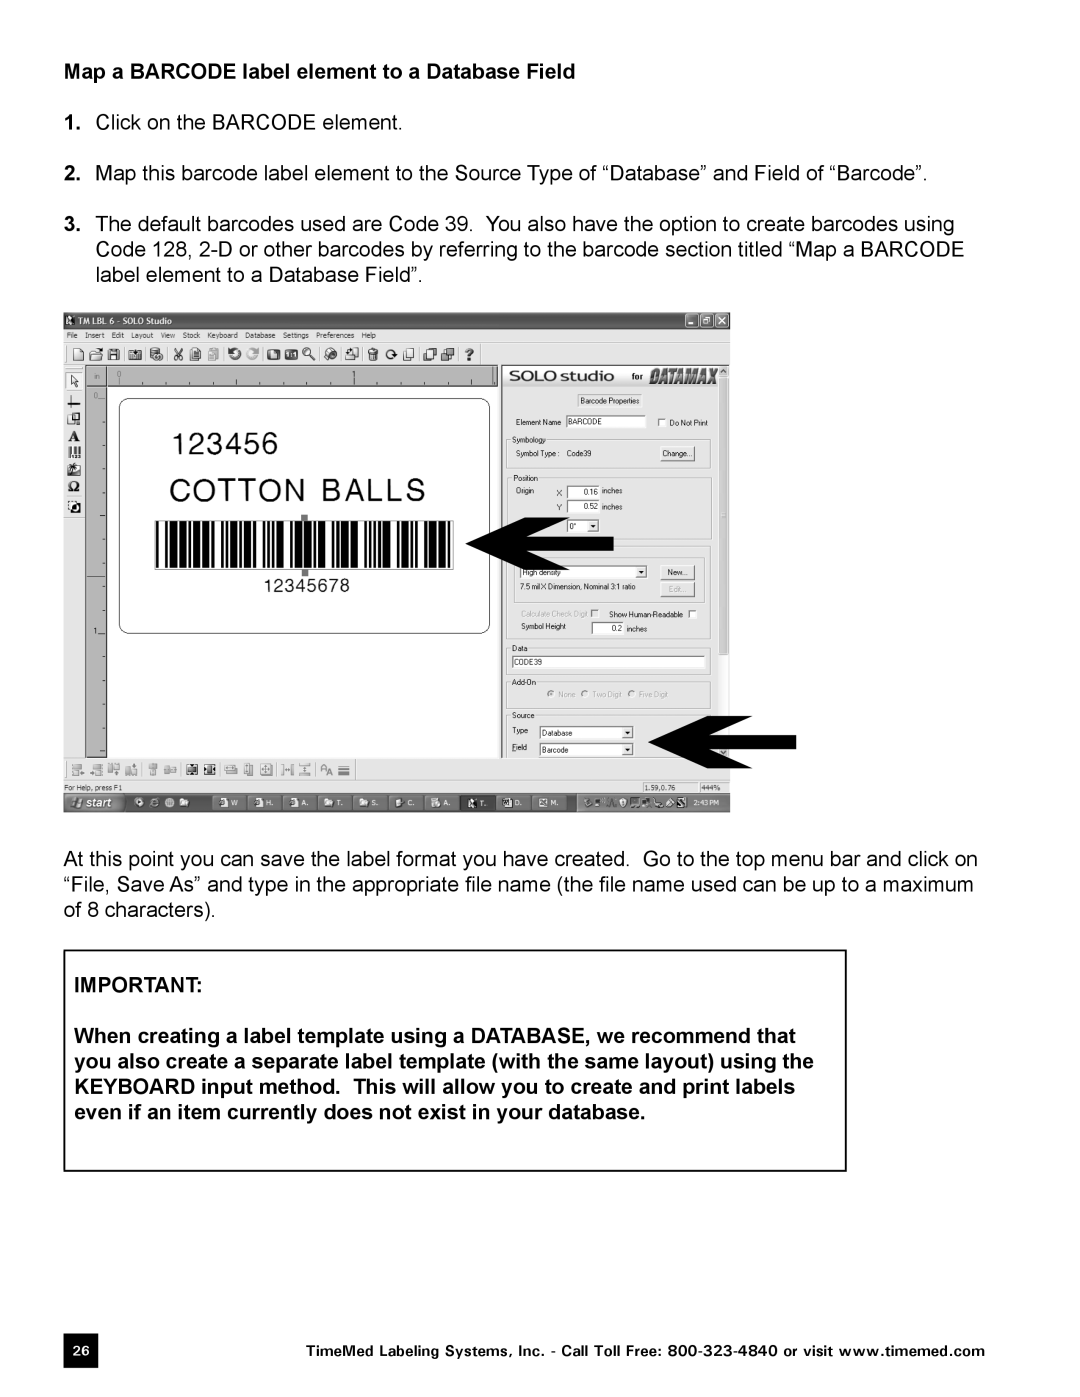 Keystone Computer Keyboard manual Map a BARCODE label element to a Database Field 